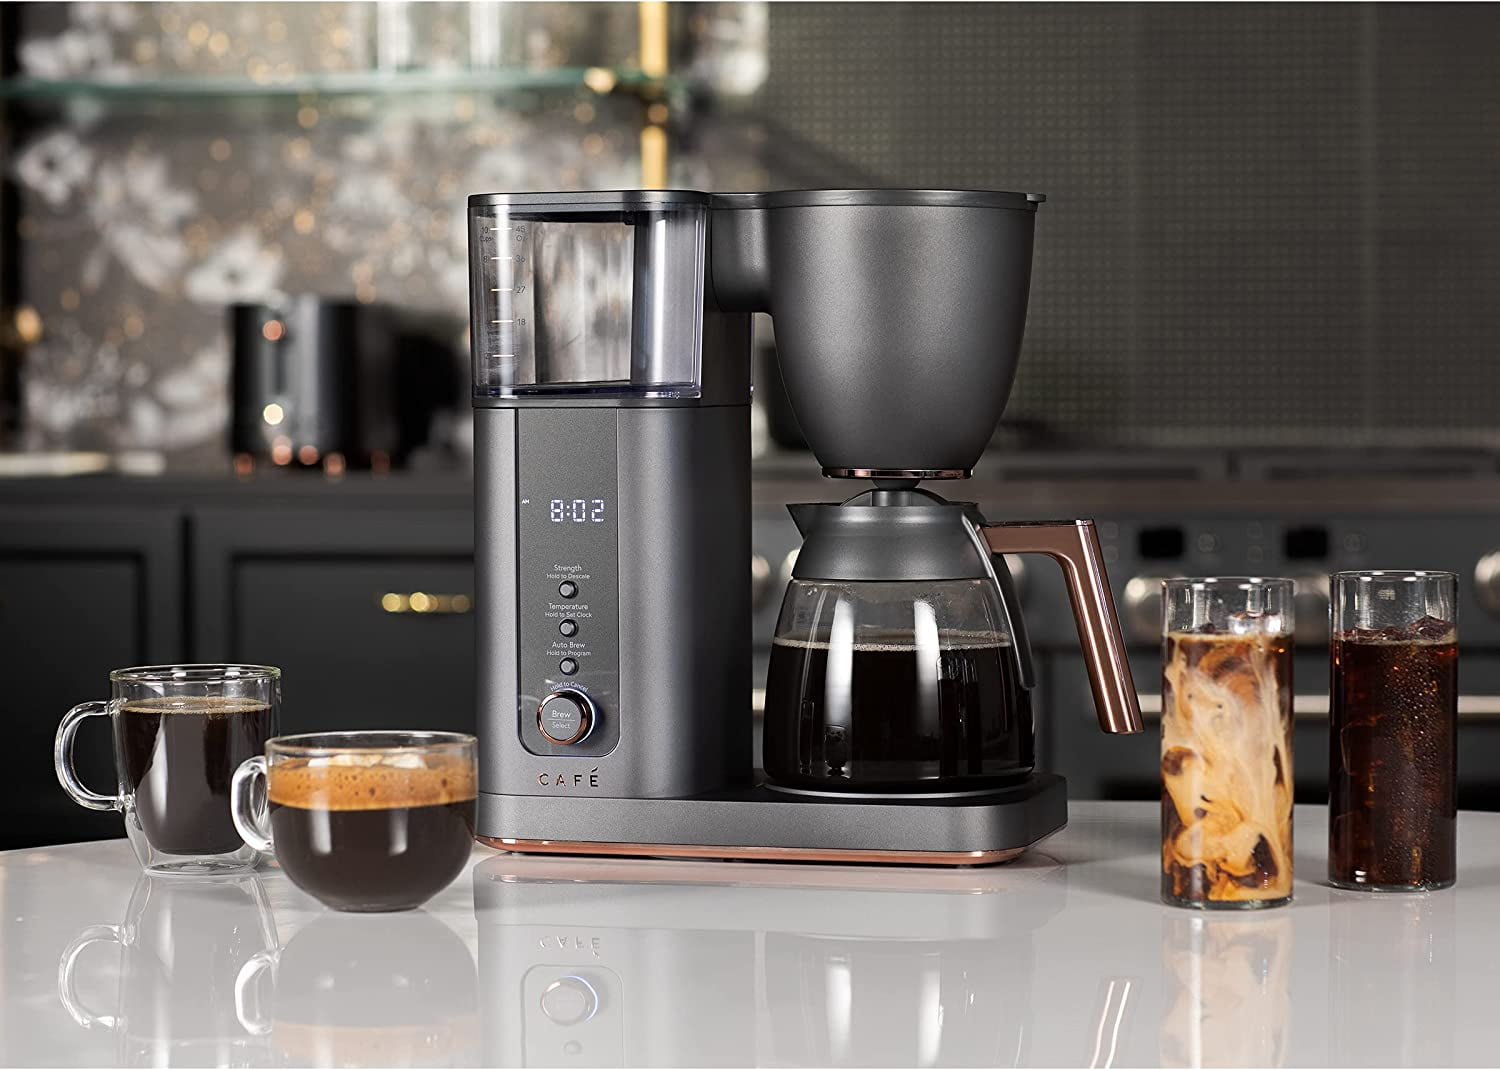 C7CDABS4RW3 by Cafe - Café™ Specialty Drip Coffee Maker with Glass